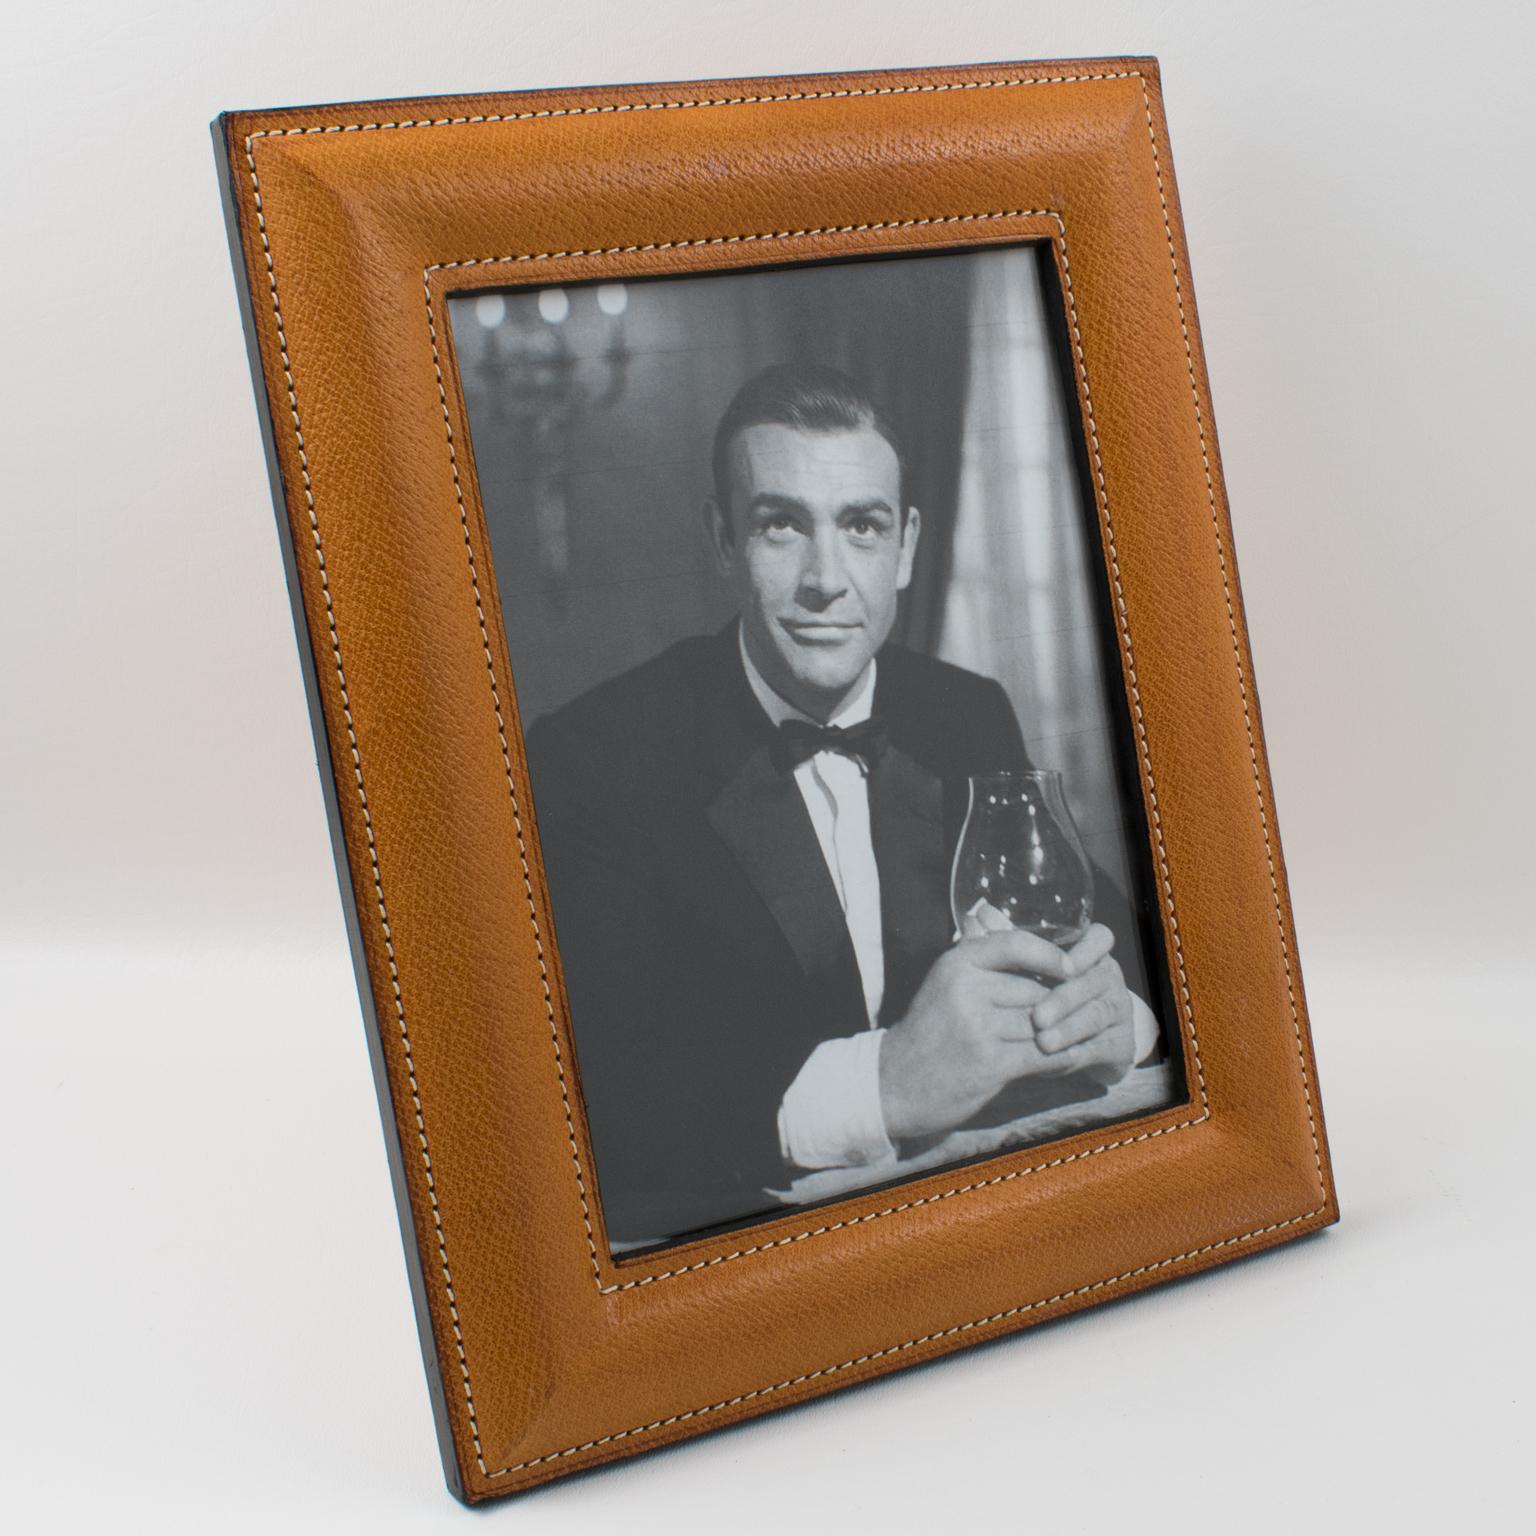 Sophisticated 1950s modernist leather picture photo frame by Valstar, Milano. Natural light cognac leather with a pattern, hand-stitched finish, and black edges. Easel and back in the same cognac leather and glass protection on the front. The frame